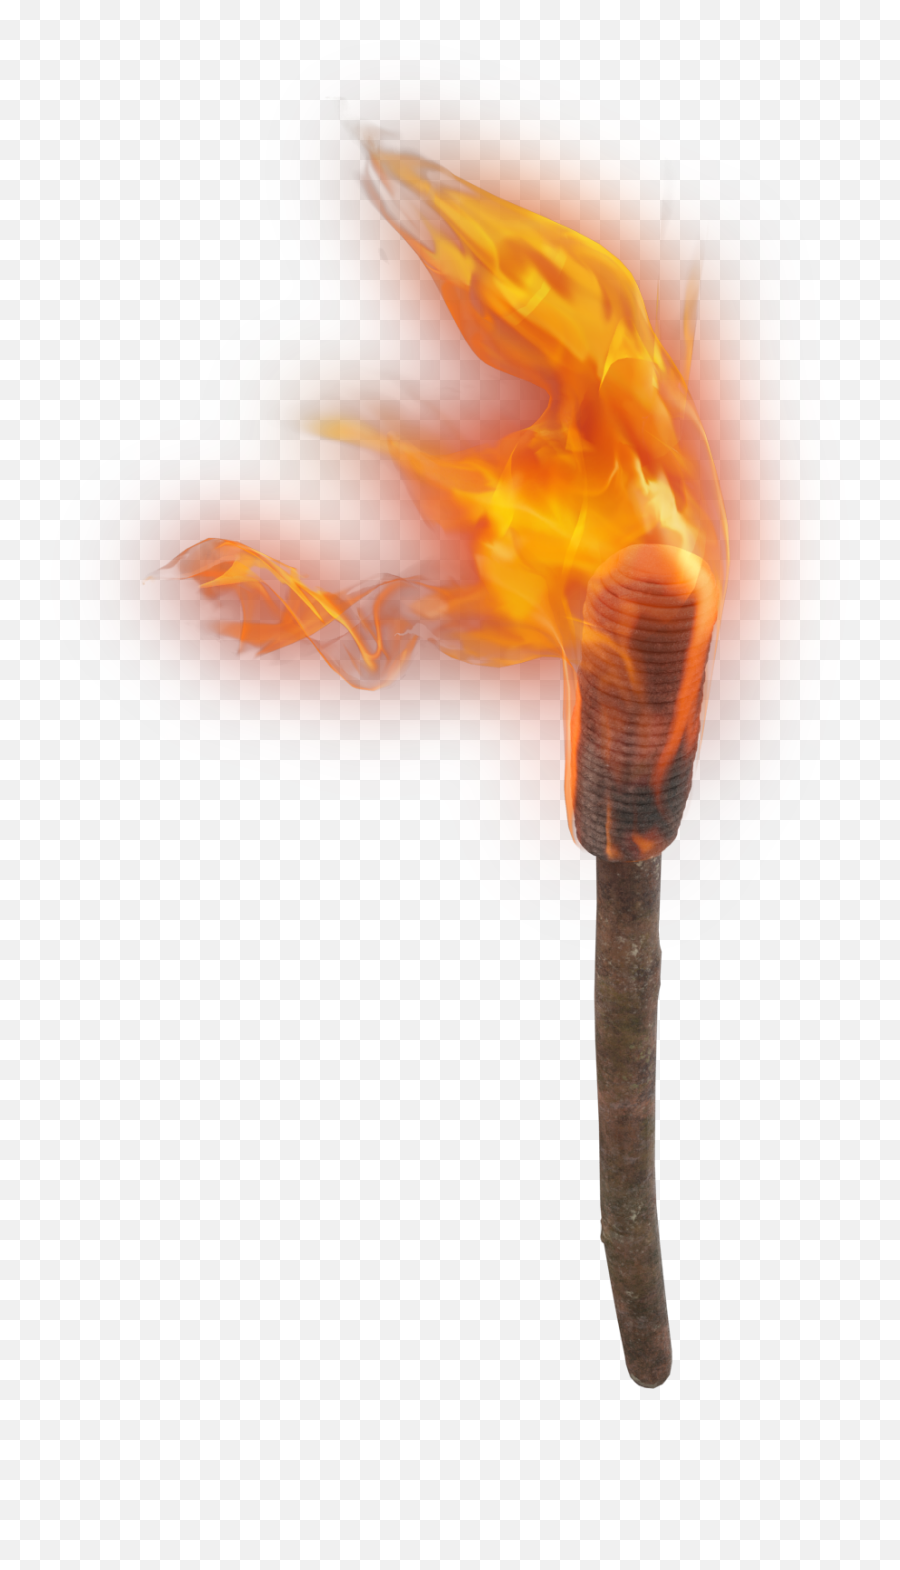 Hand Torch Png Image For Free Download - Fire On A Stick,Torch Png